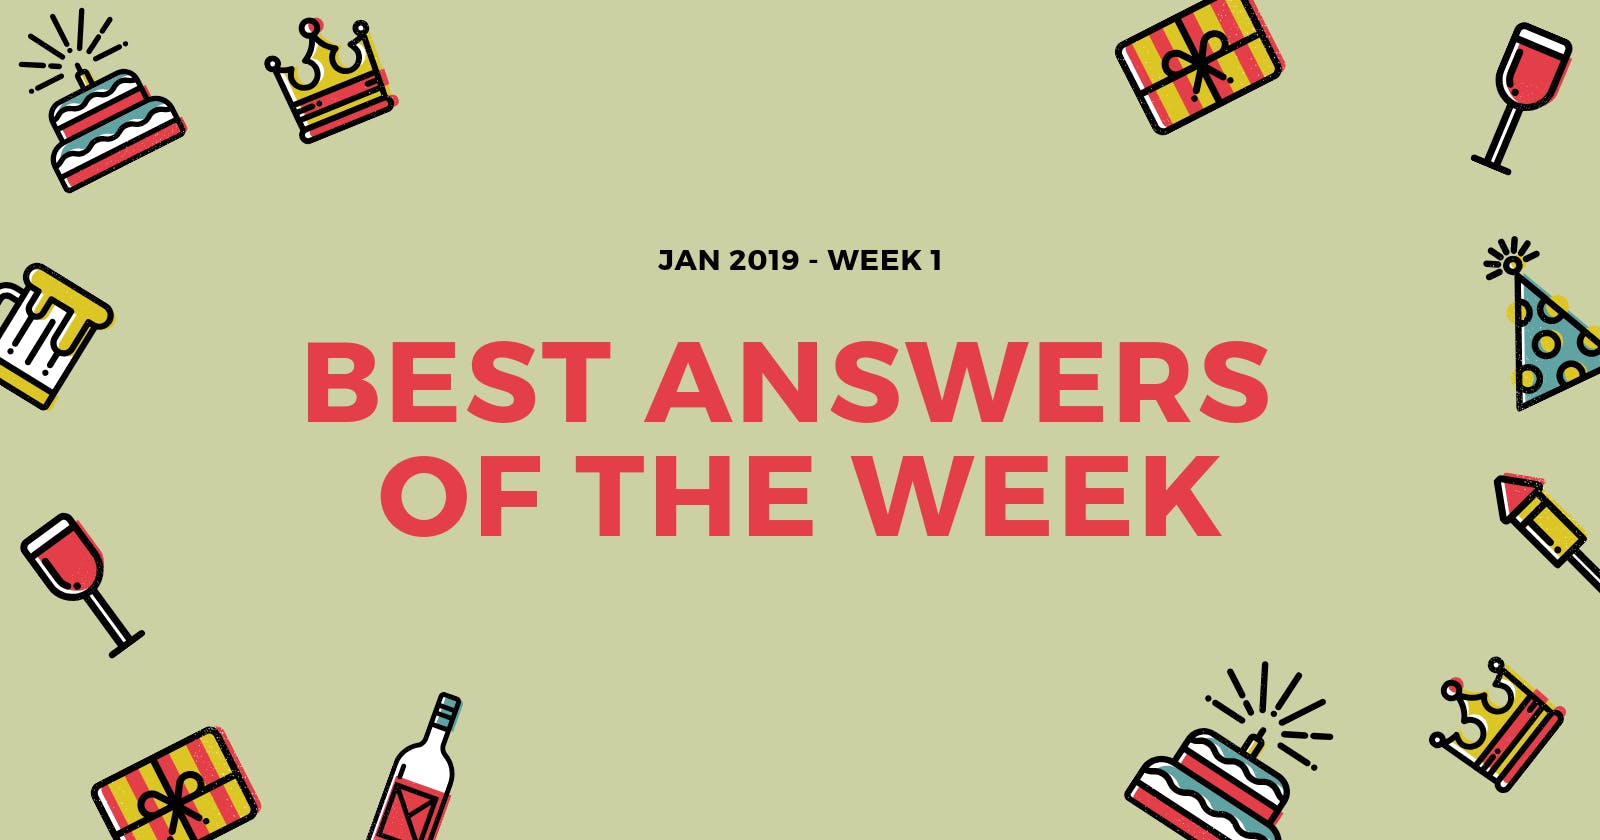 Best answers of the week: January 2019 (Week 1)